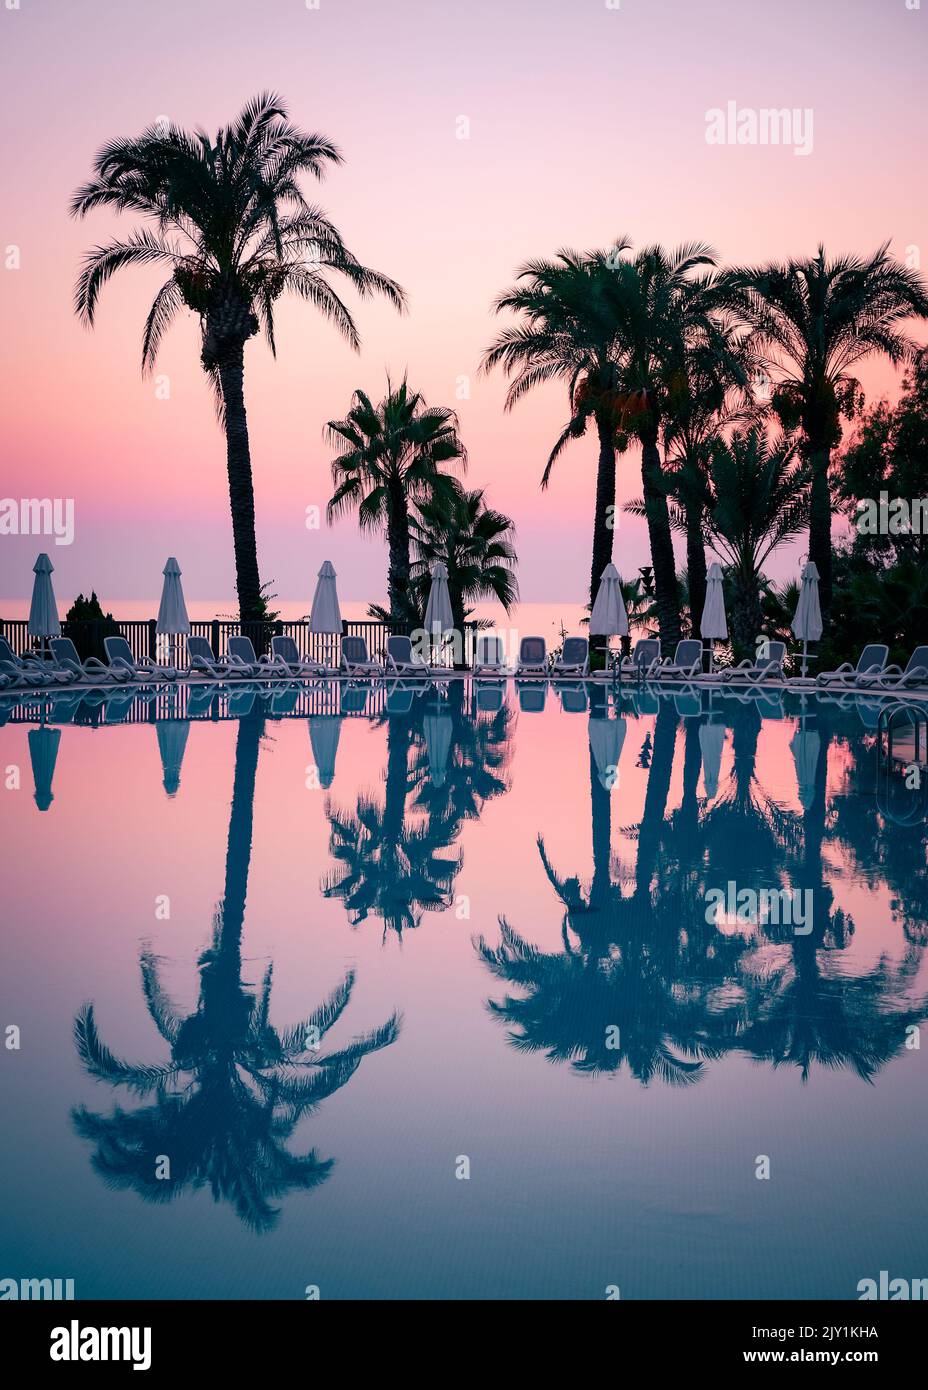 Silhouette of palm trees at the resort pool on pink and purple sunset sky, vertical image. Stock Photo